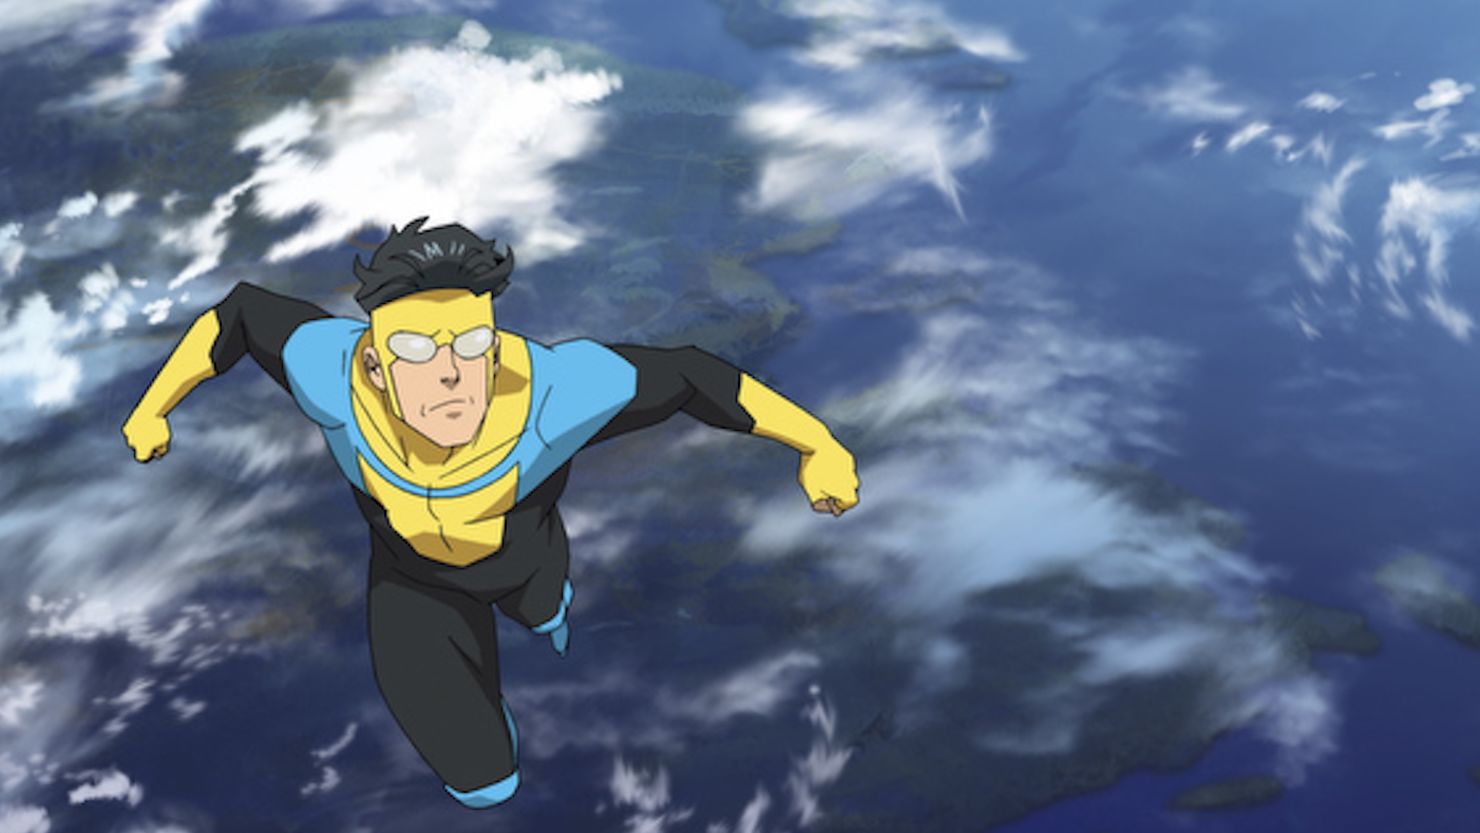 How I would've ended INVINCIBLE. : r/Invincible